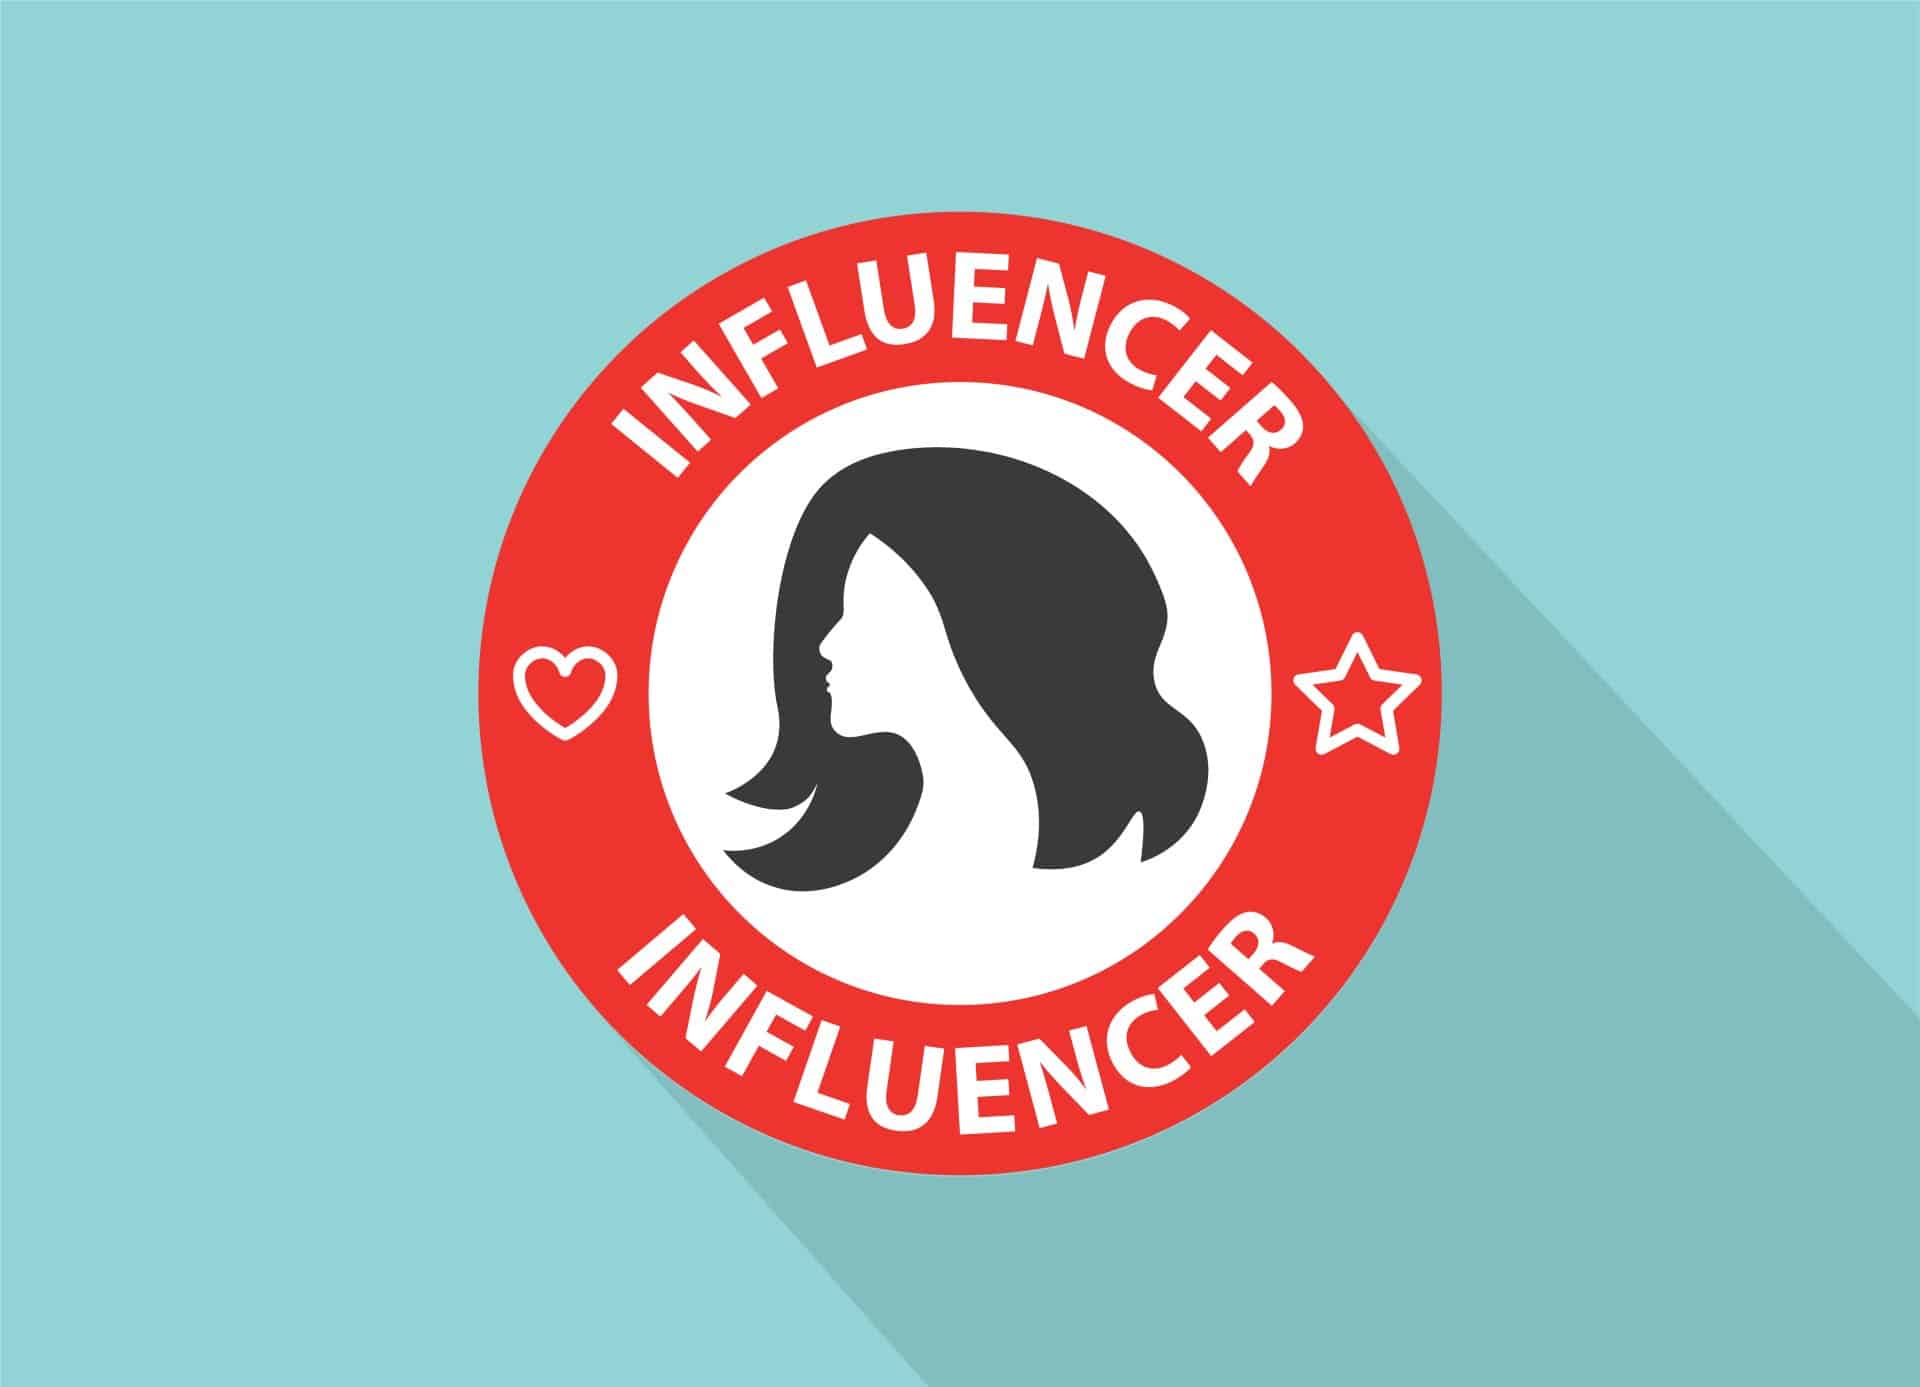 Getting Started with an Influencer Marketing Campaign